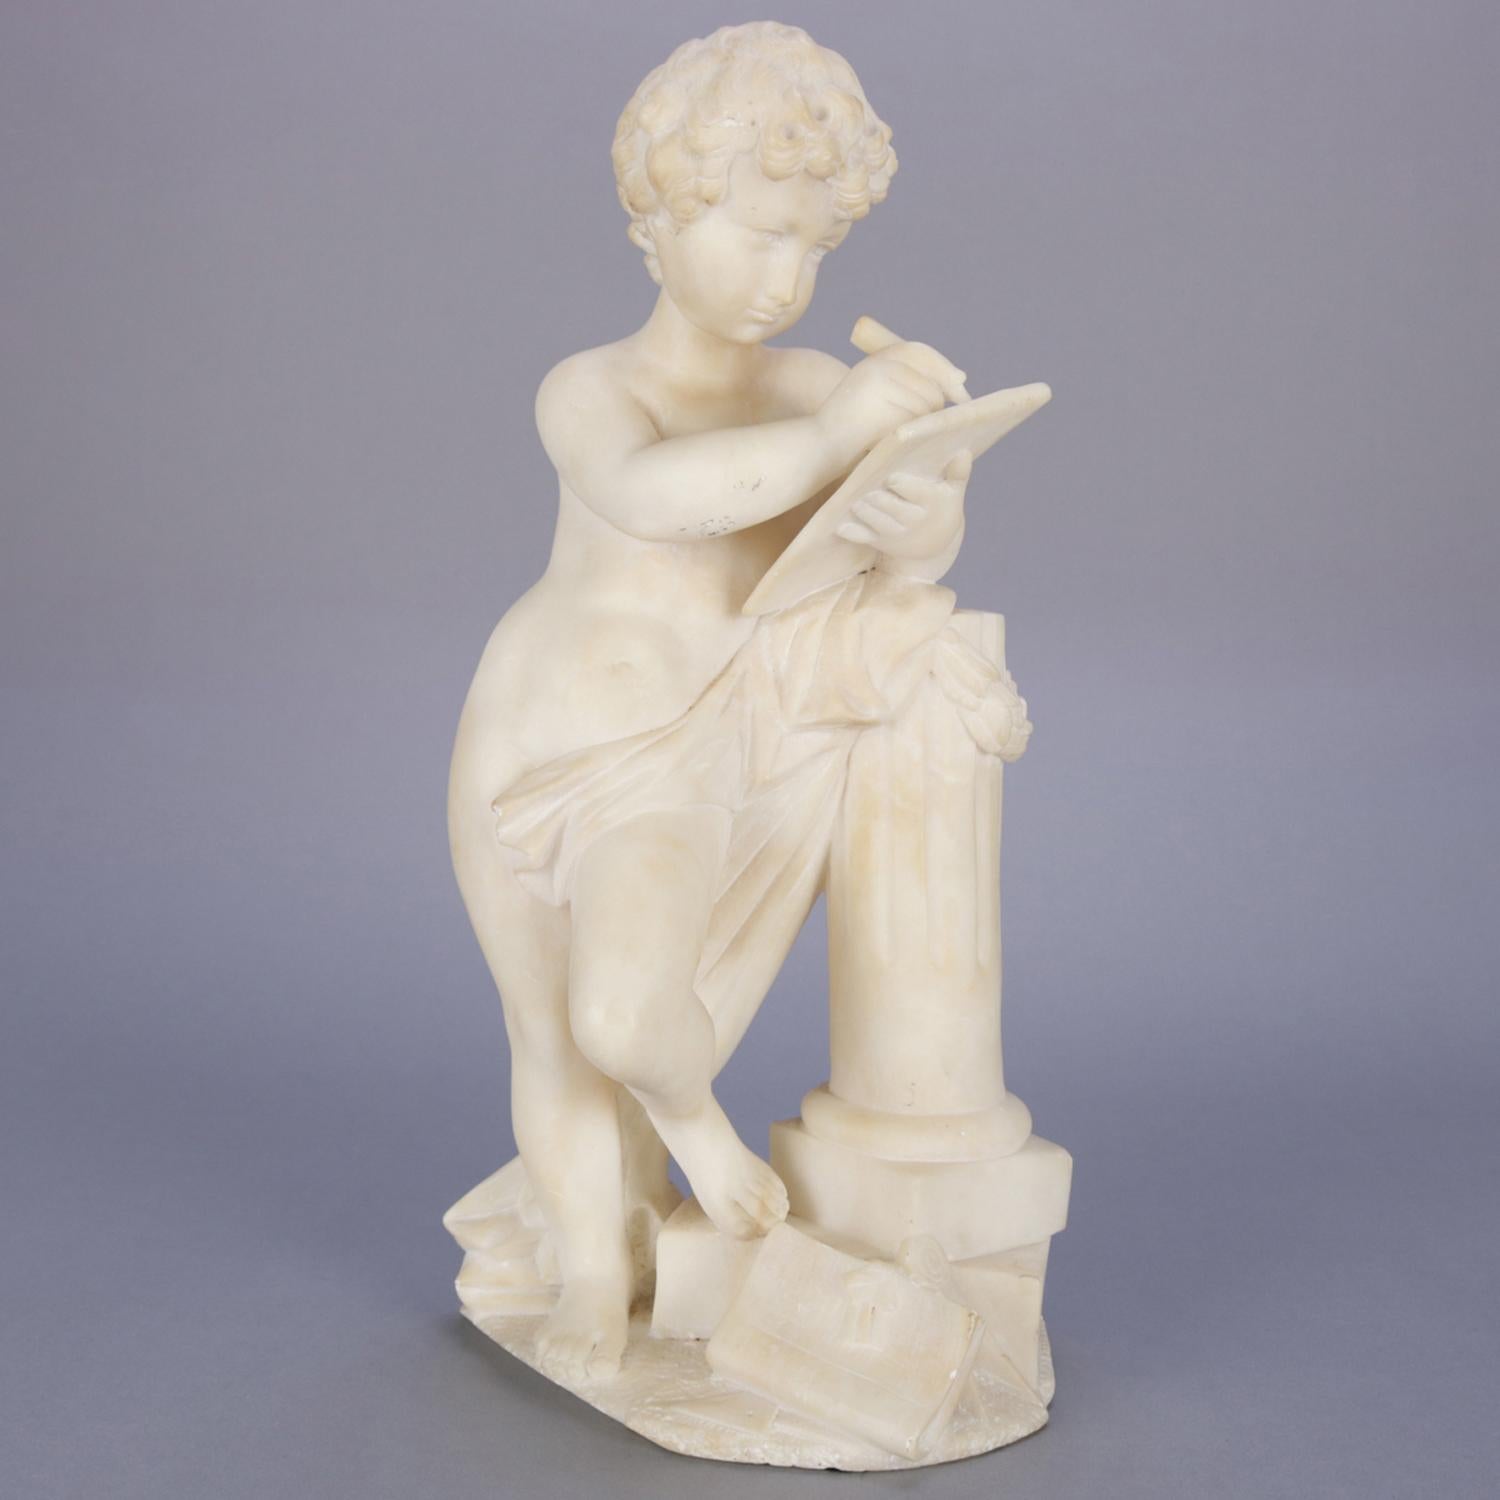 Classical Italian carved alabaster figural portrait sculpture features full length young boy poet or cherub resting against Corinthian column while composing, circa 1890.

Measures: 17.25